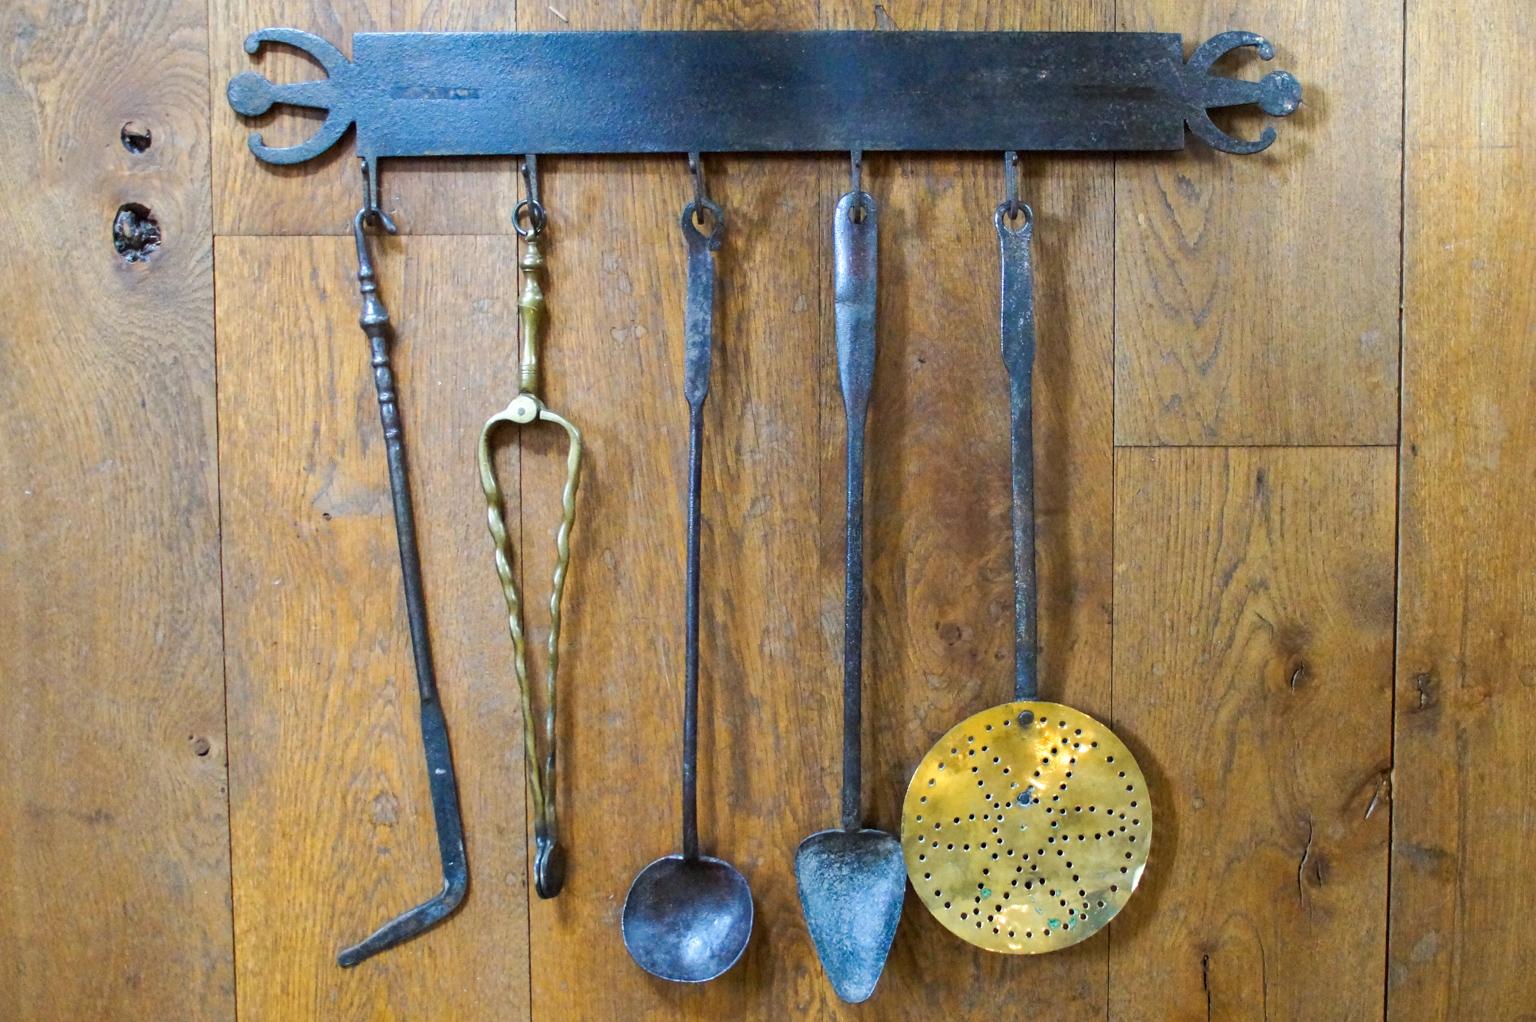 18th or early 19th century Dutch Louis XV fireplace tool set consisting of a hanger and five fire irons and kitchen tools. The tools include a wrought iron poker, brass tongs, two wrought spoons and a wrought iron with brass skimmer. The tool set is